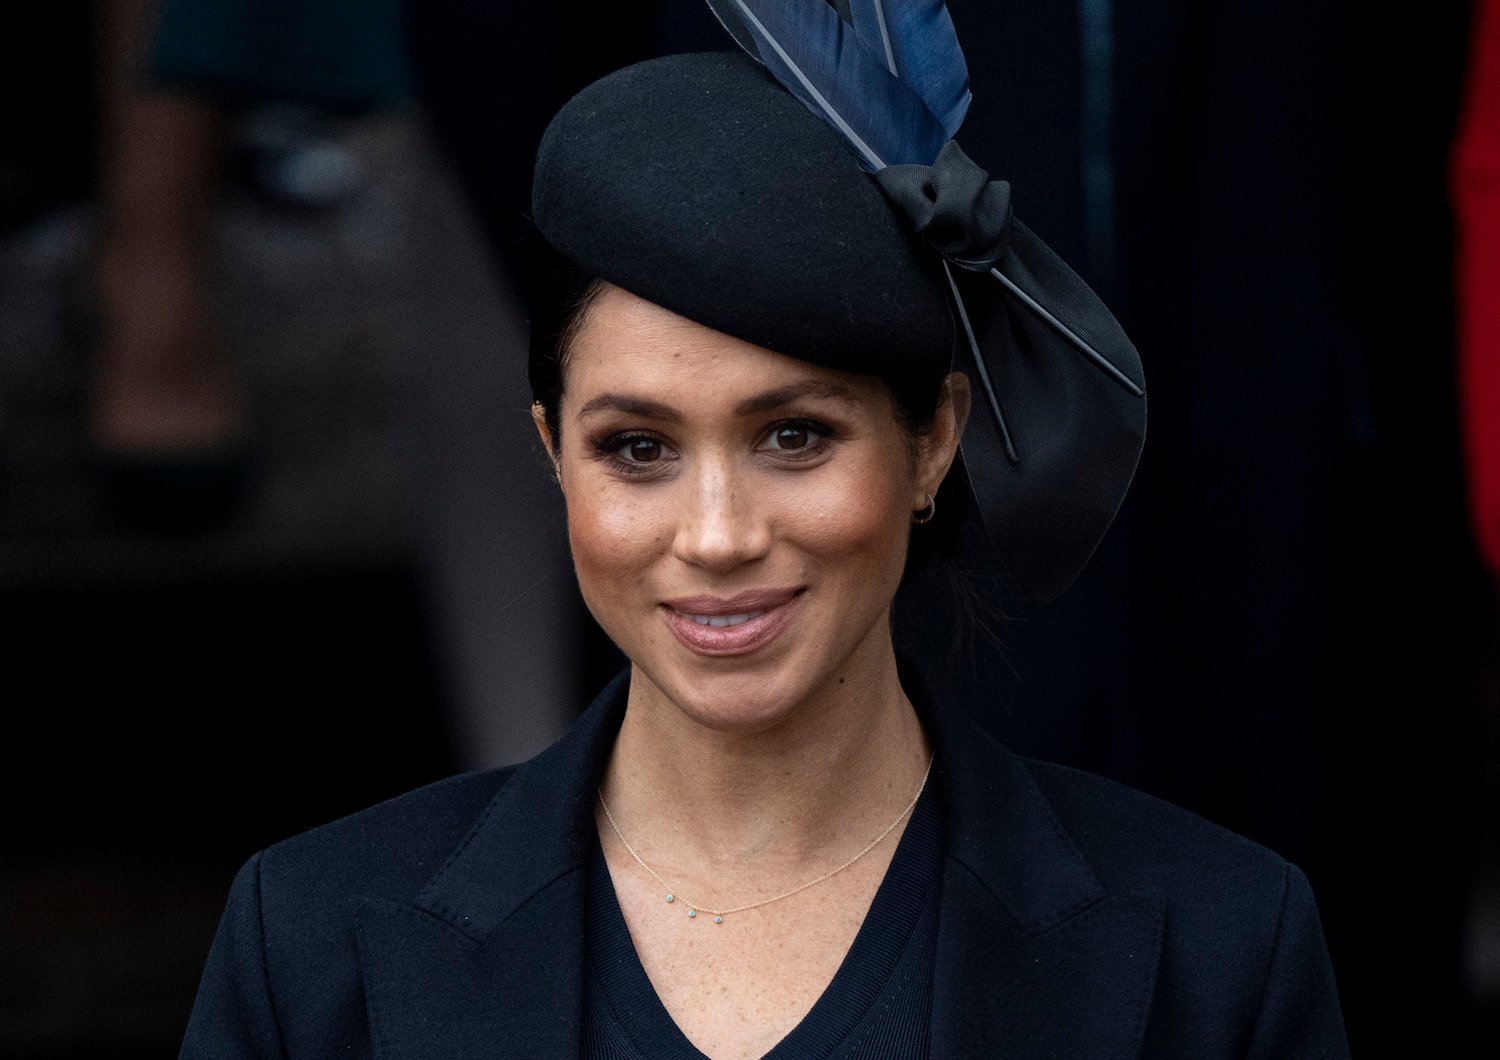 Meghan Markle attends Christmas Day Church service 2018